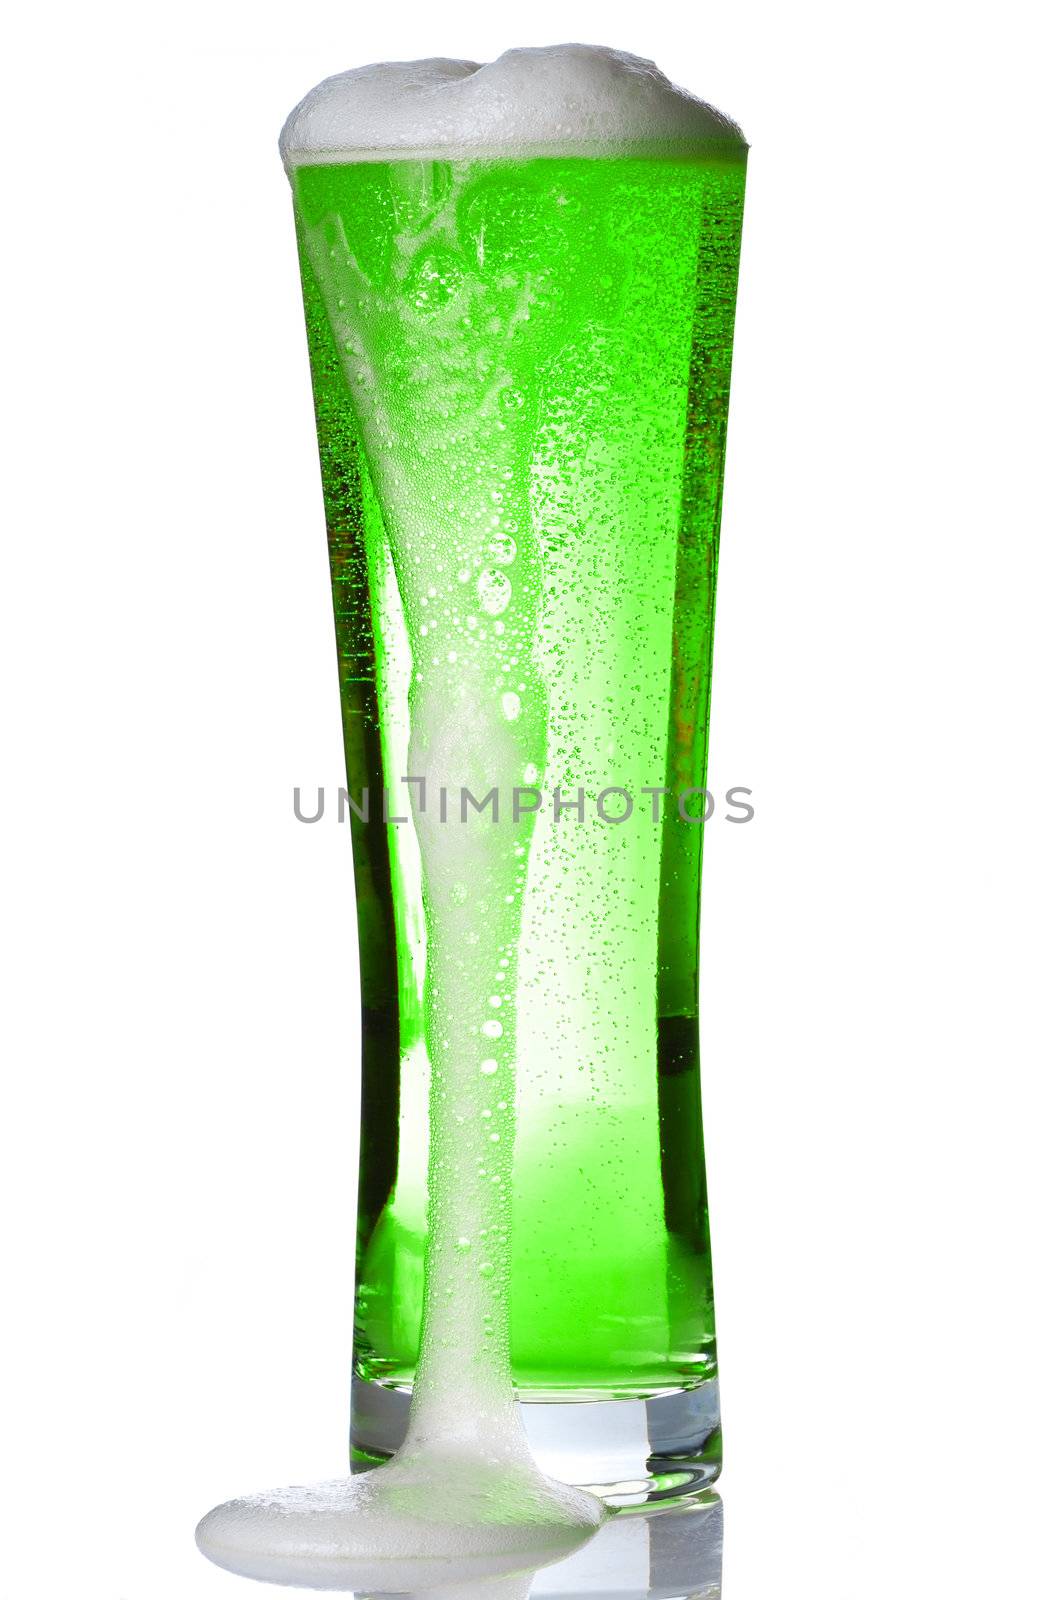 Green Beer by haveseen